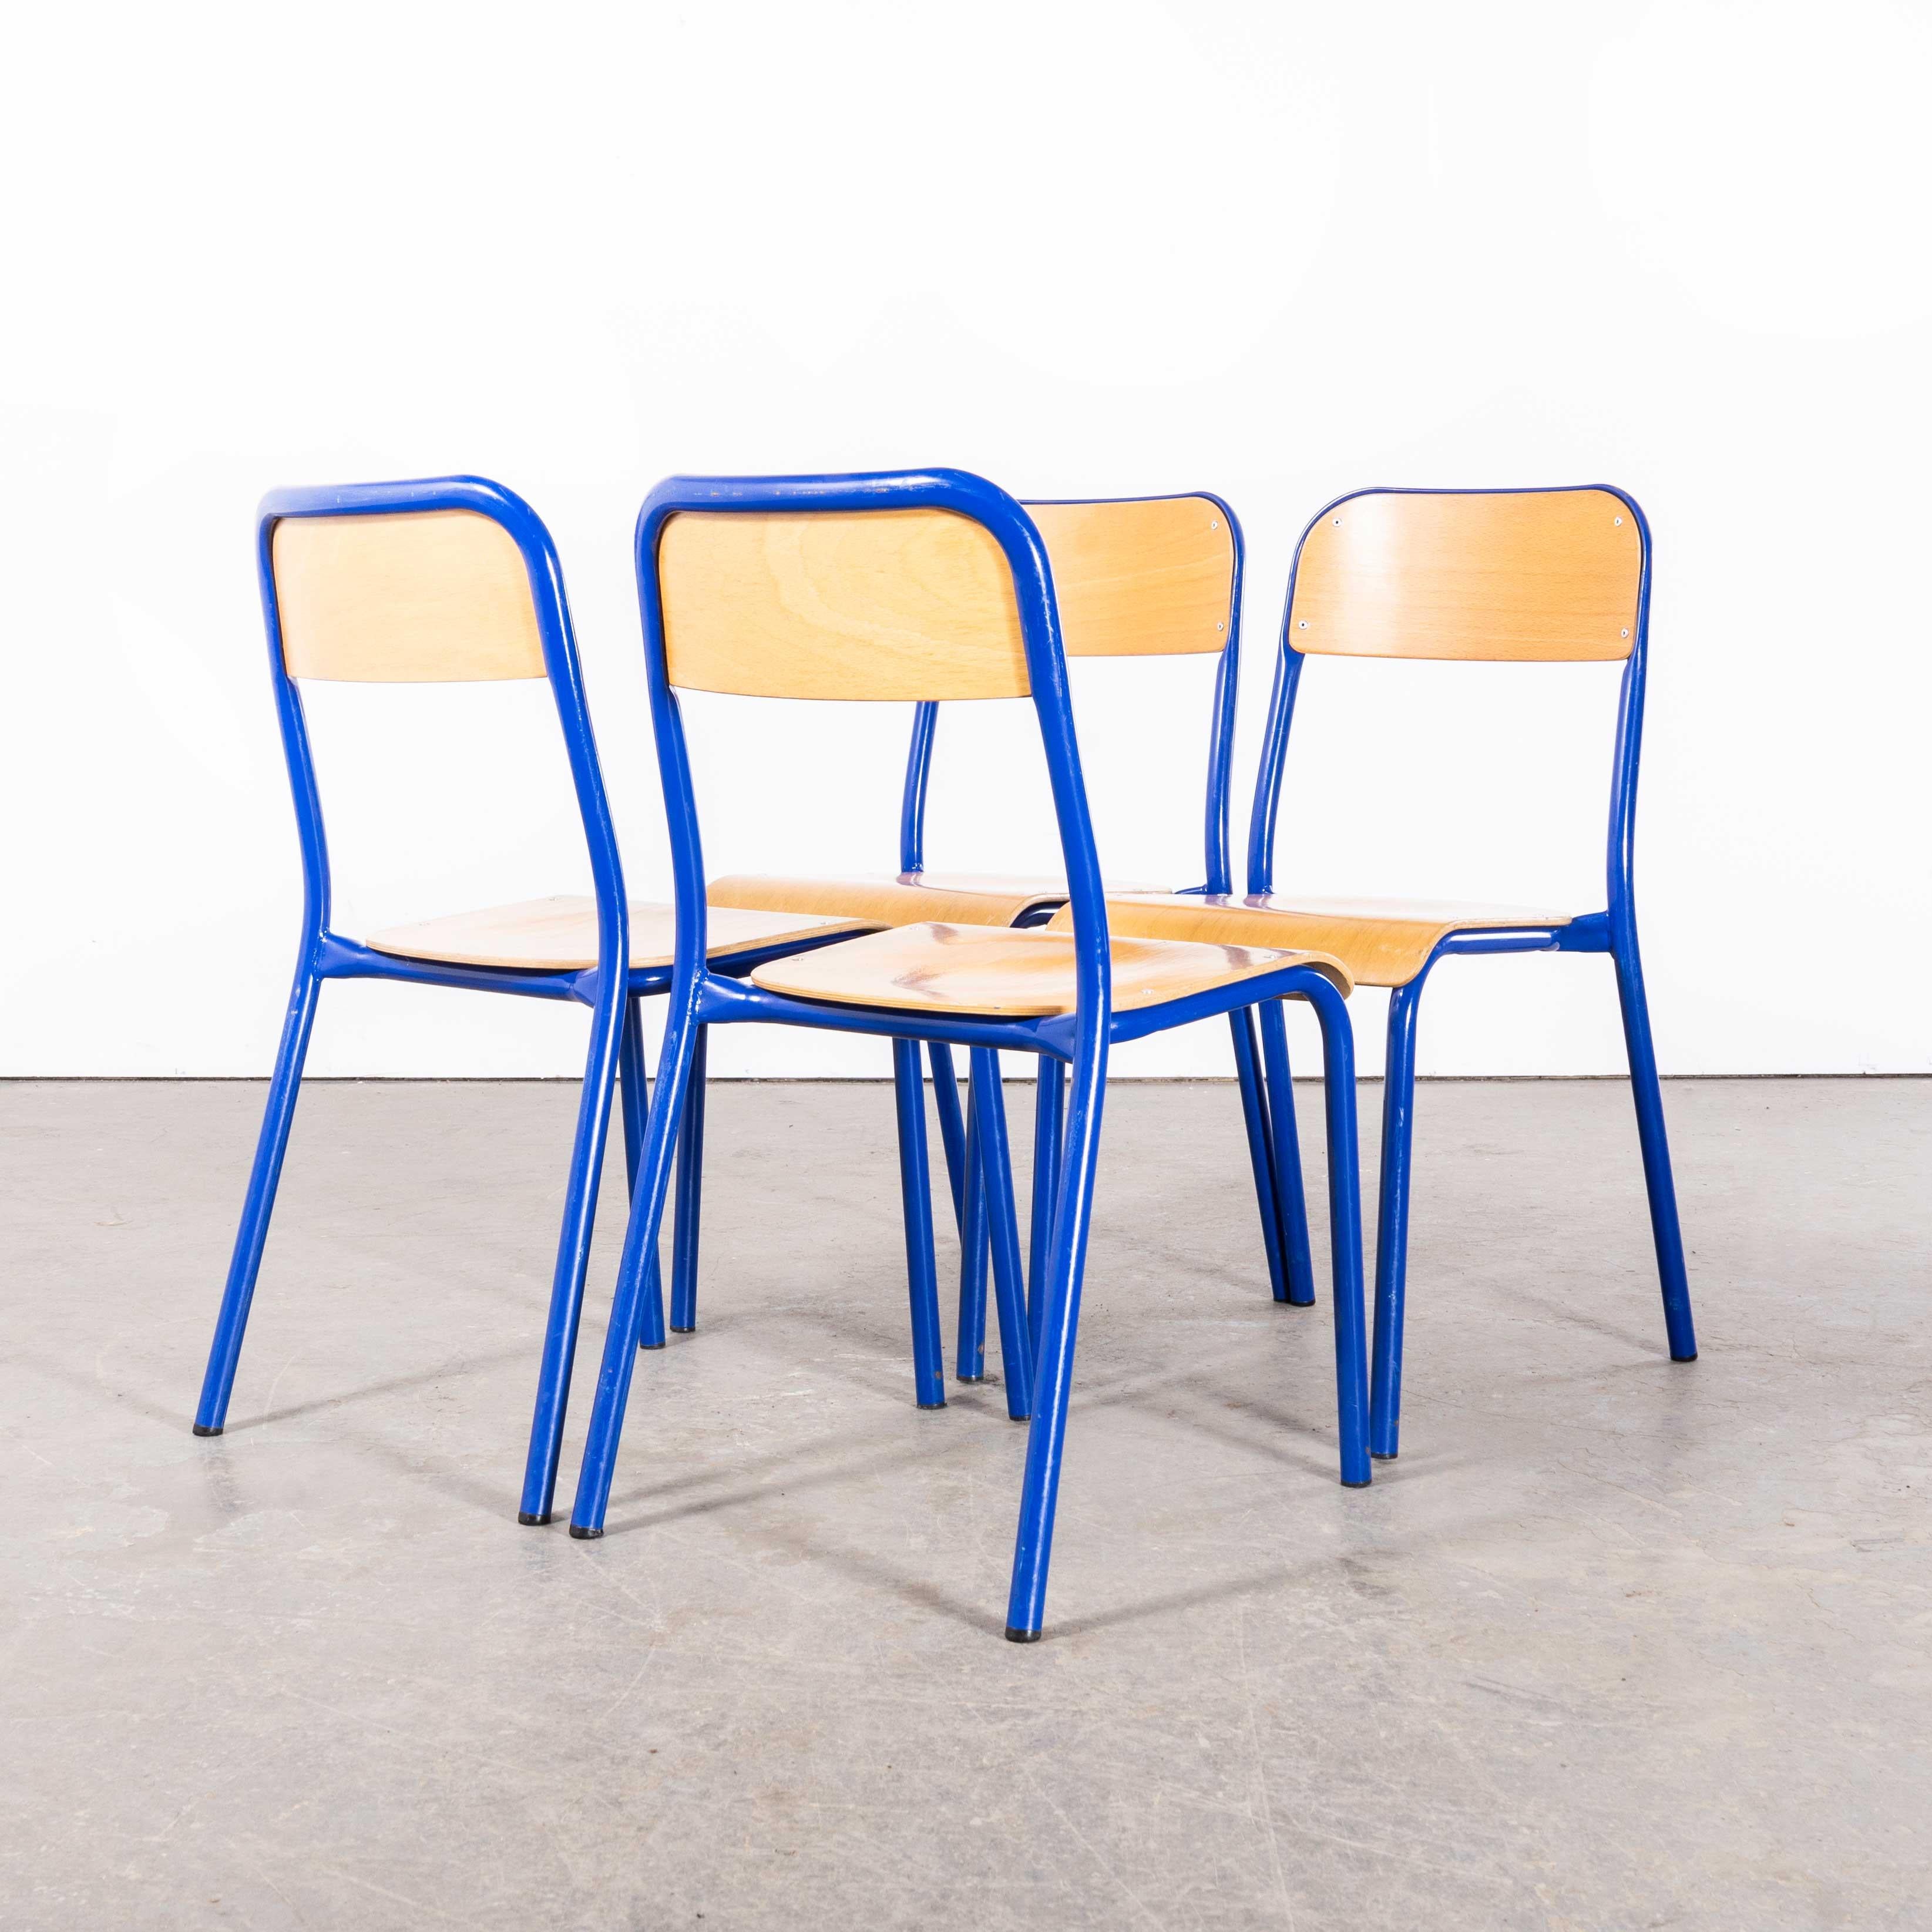 1970’s French Mullca Stacking D Back Dining Chair – Blue – Set Of Four
1970’s French Mullca Stacking D Back Dining Chair – Blue – Set Of Four. One of our most favourite chairs, in 1947 Robert Muller and Gaston Cavaillon created the company that went